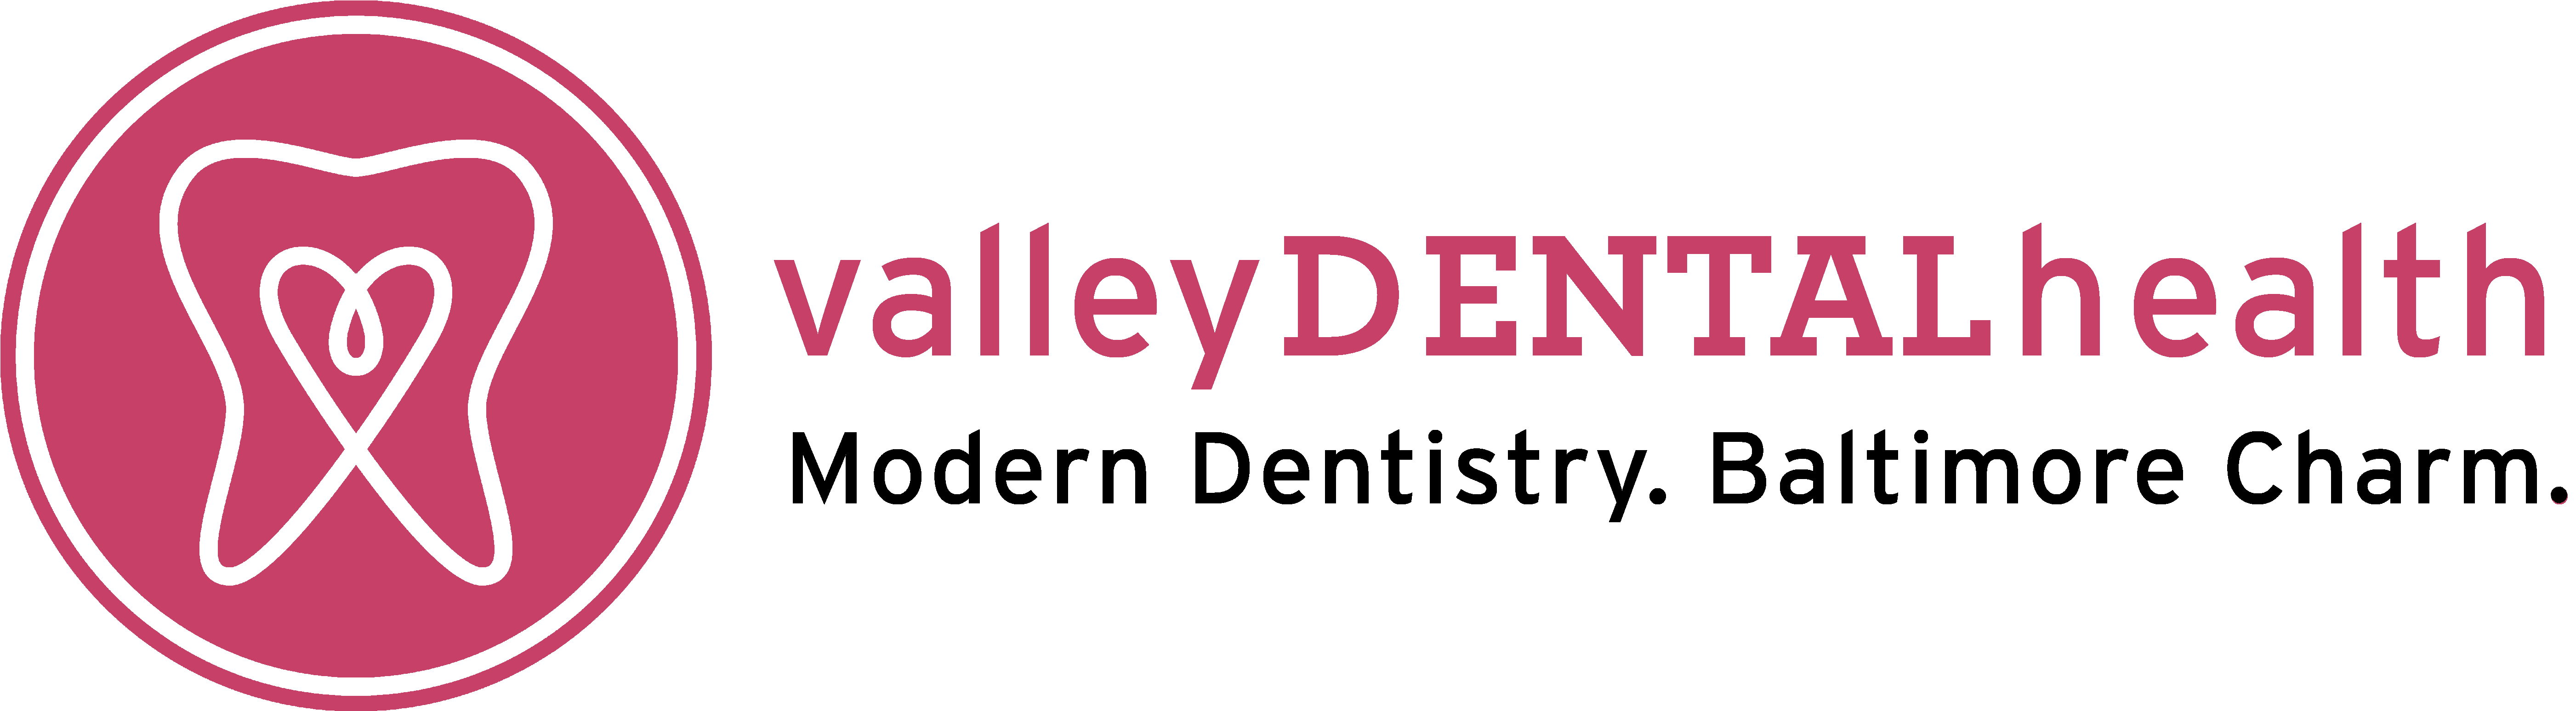 Dentists in Hunt Valley, MD